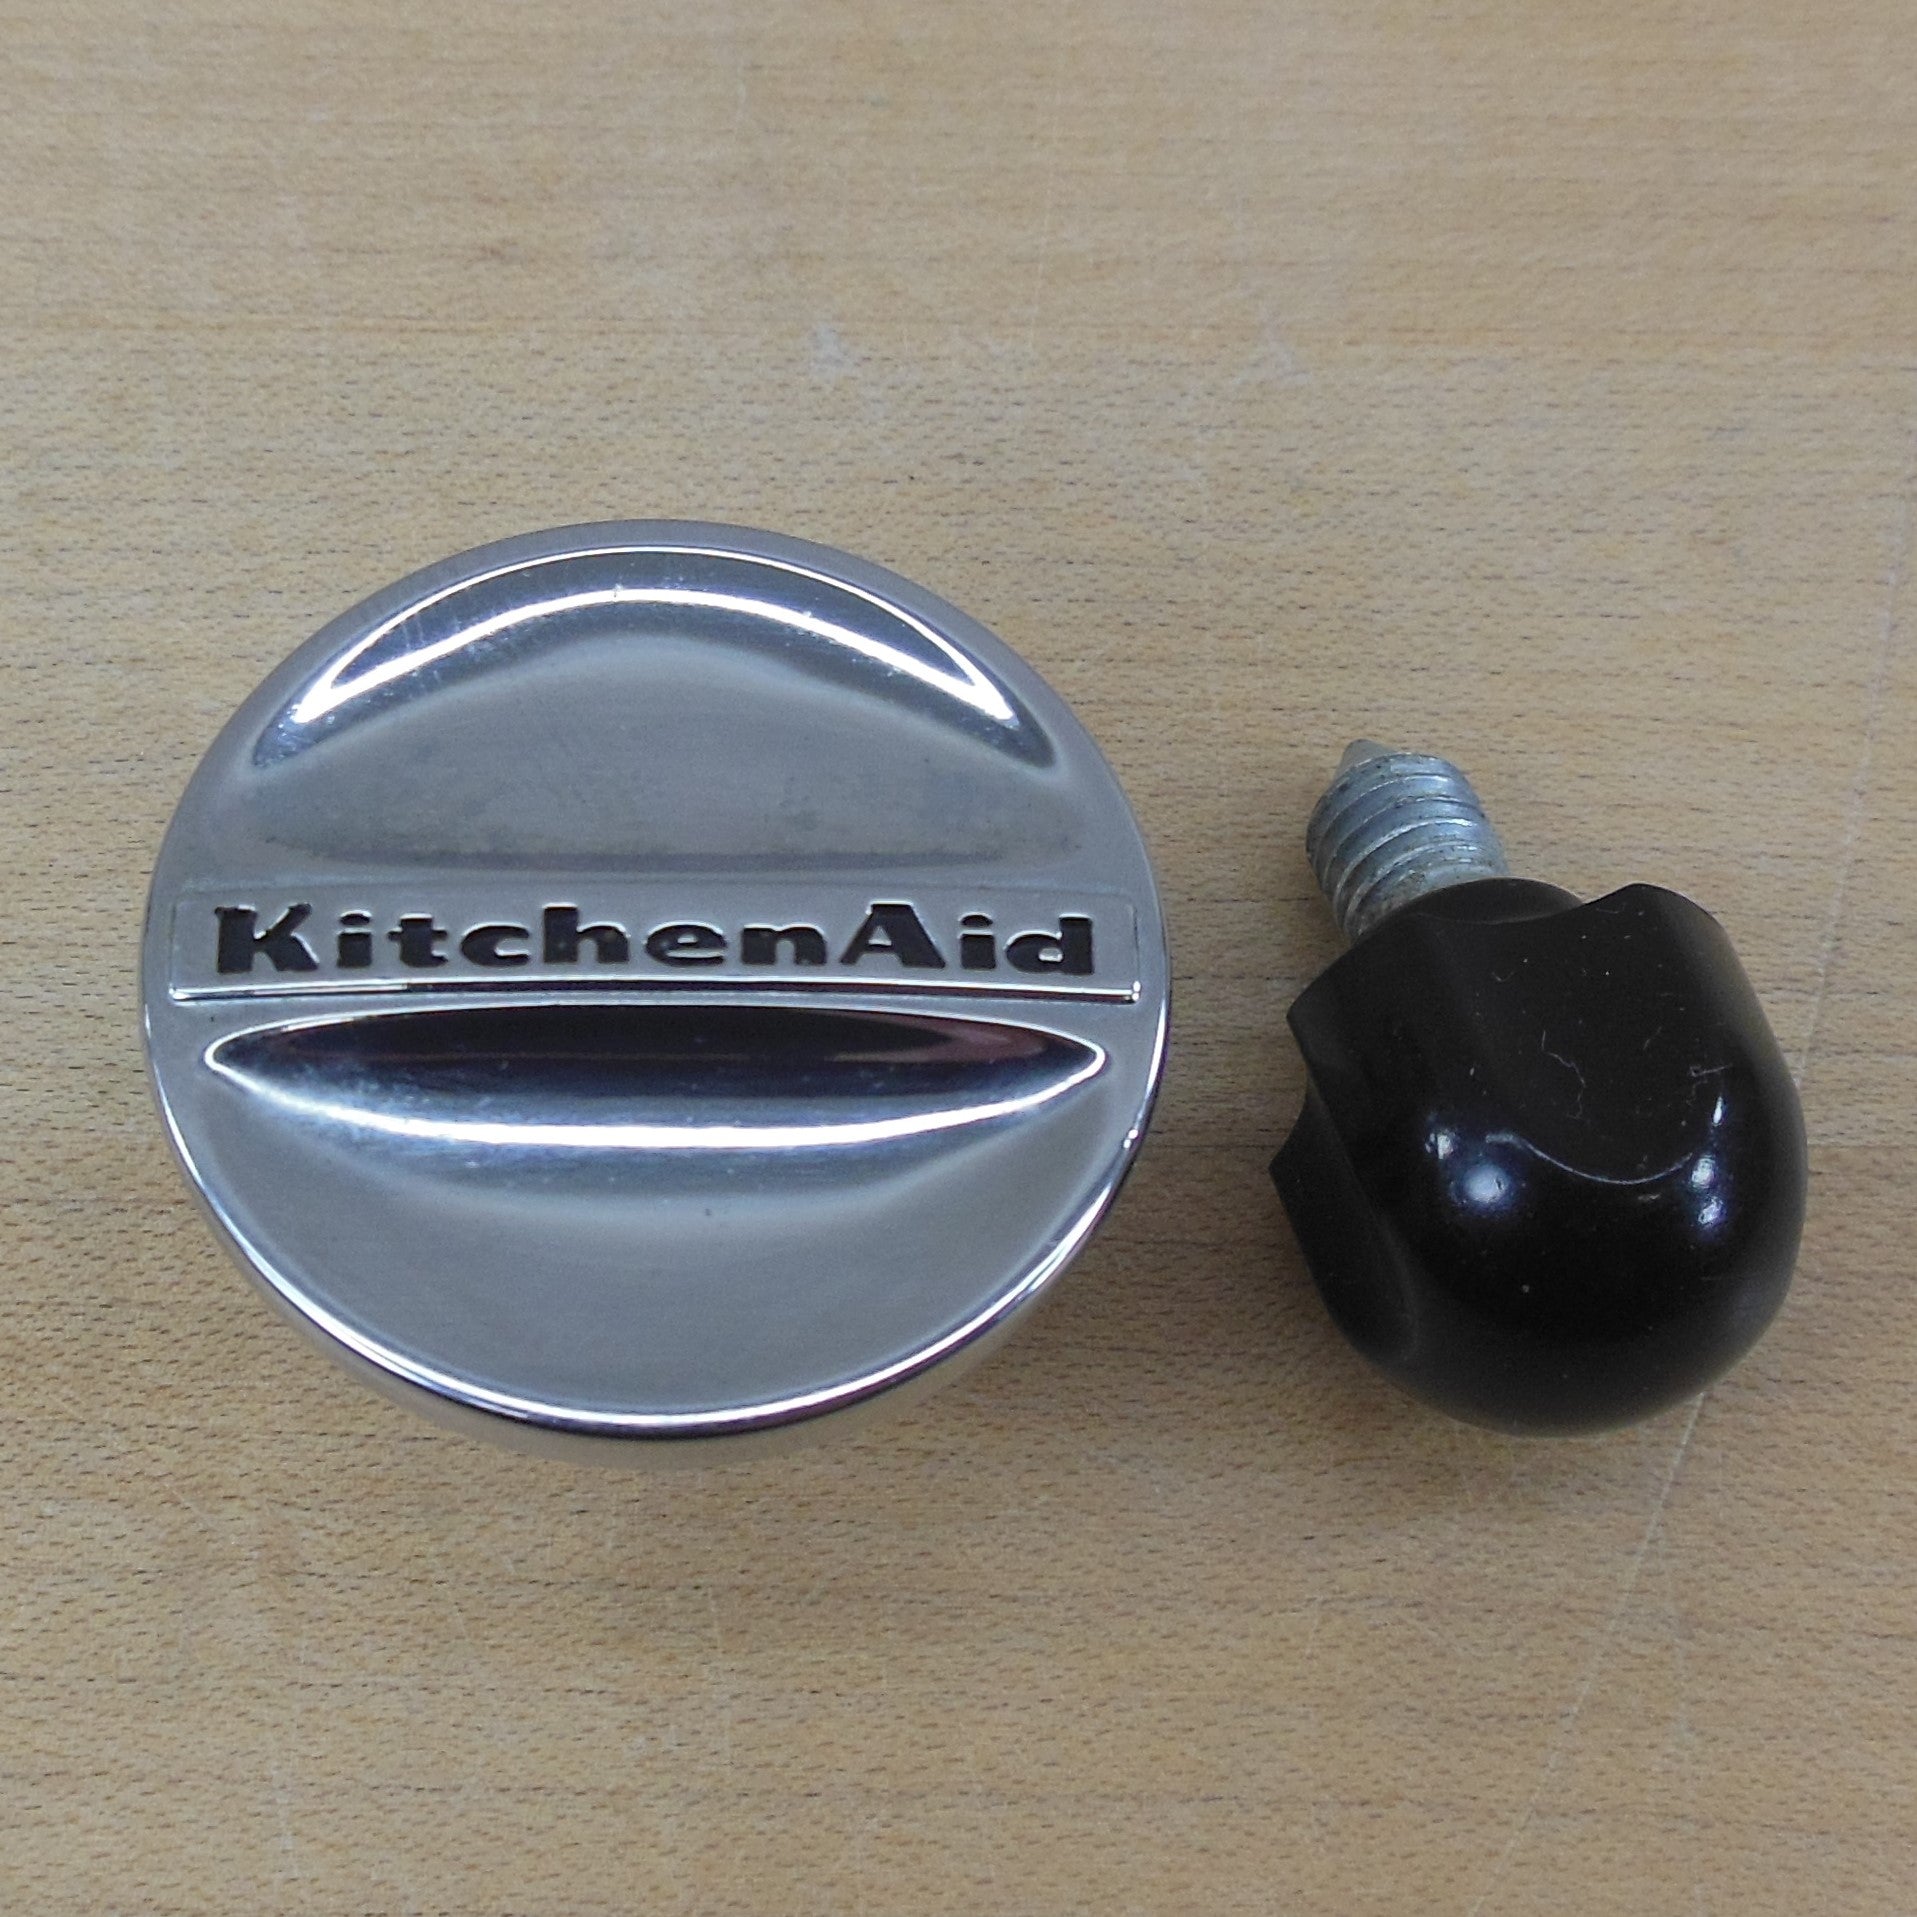 Mixer Knob for Kitchenaid Replacement Parts,As Kitchenaid Mixer  Replacement,Mixer Screw Attachment for Kitchenaid Stand Mixer 2